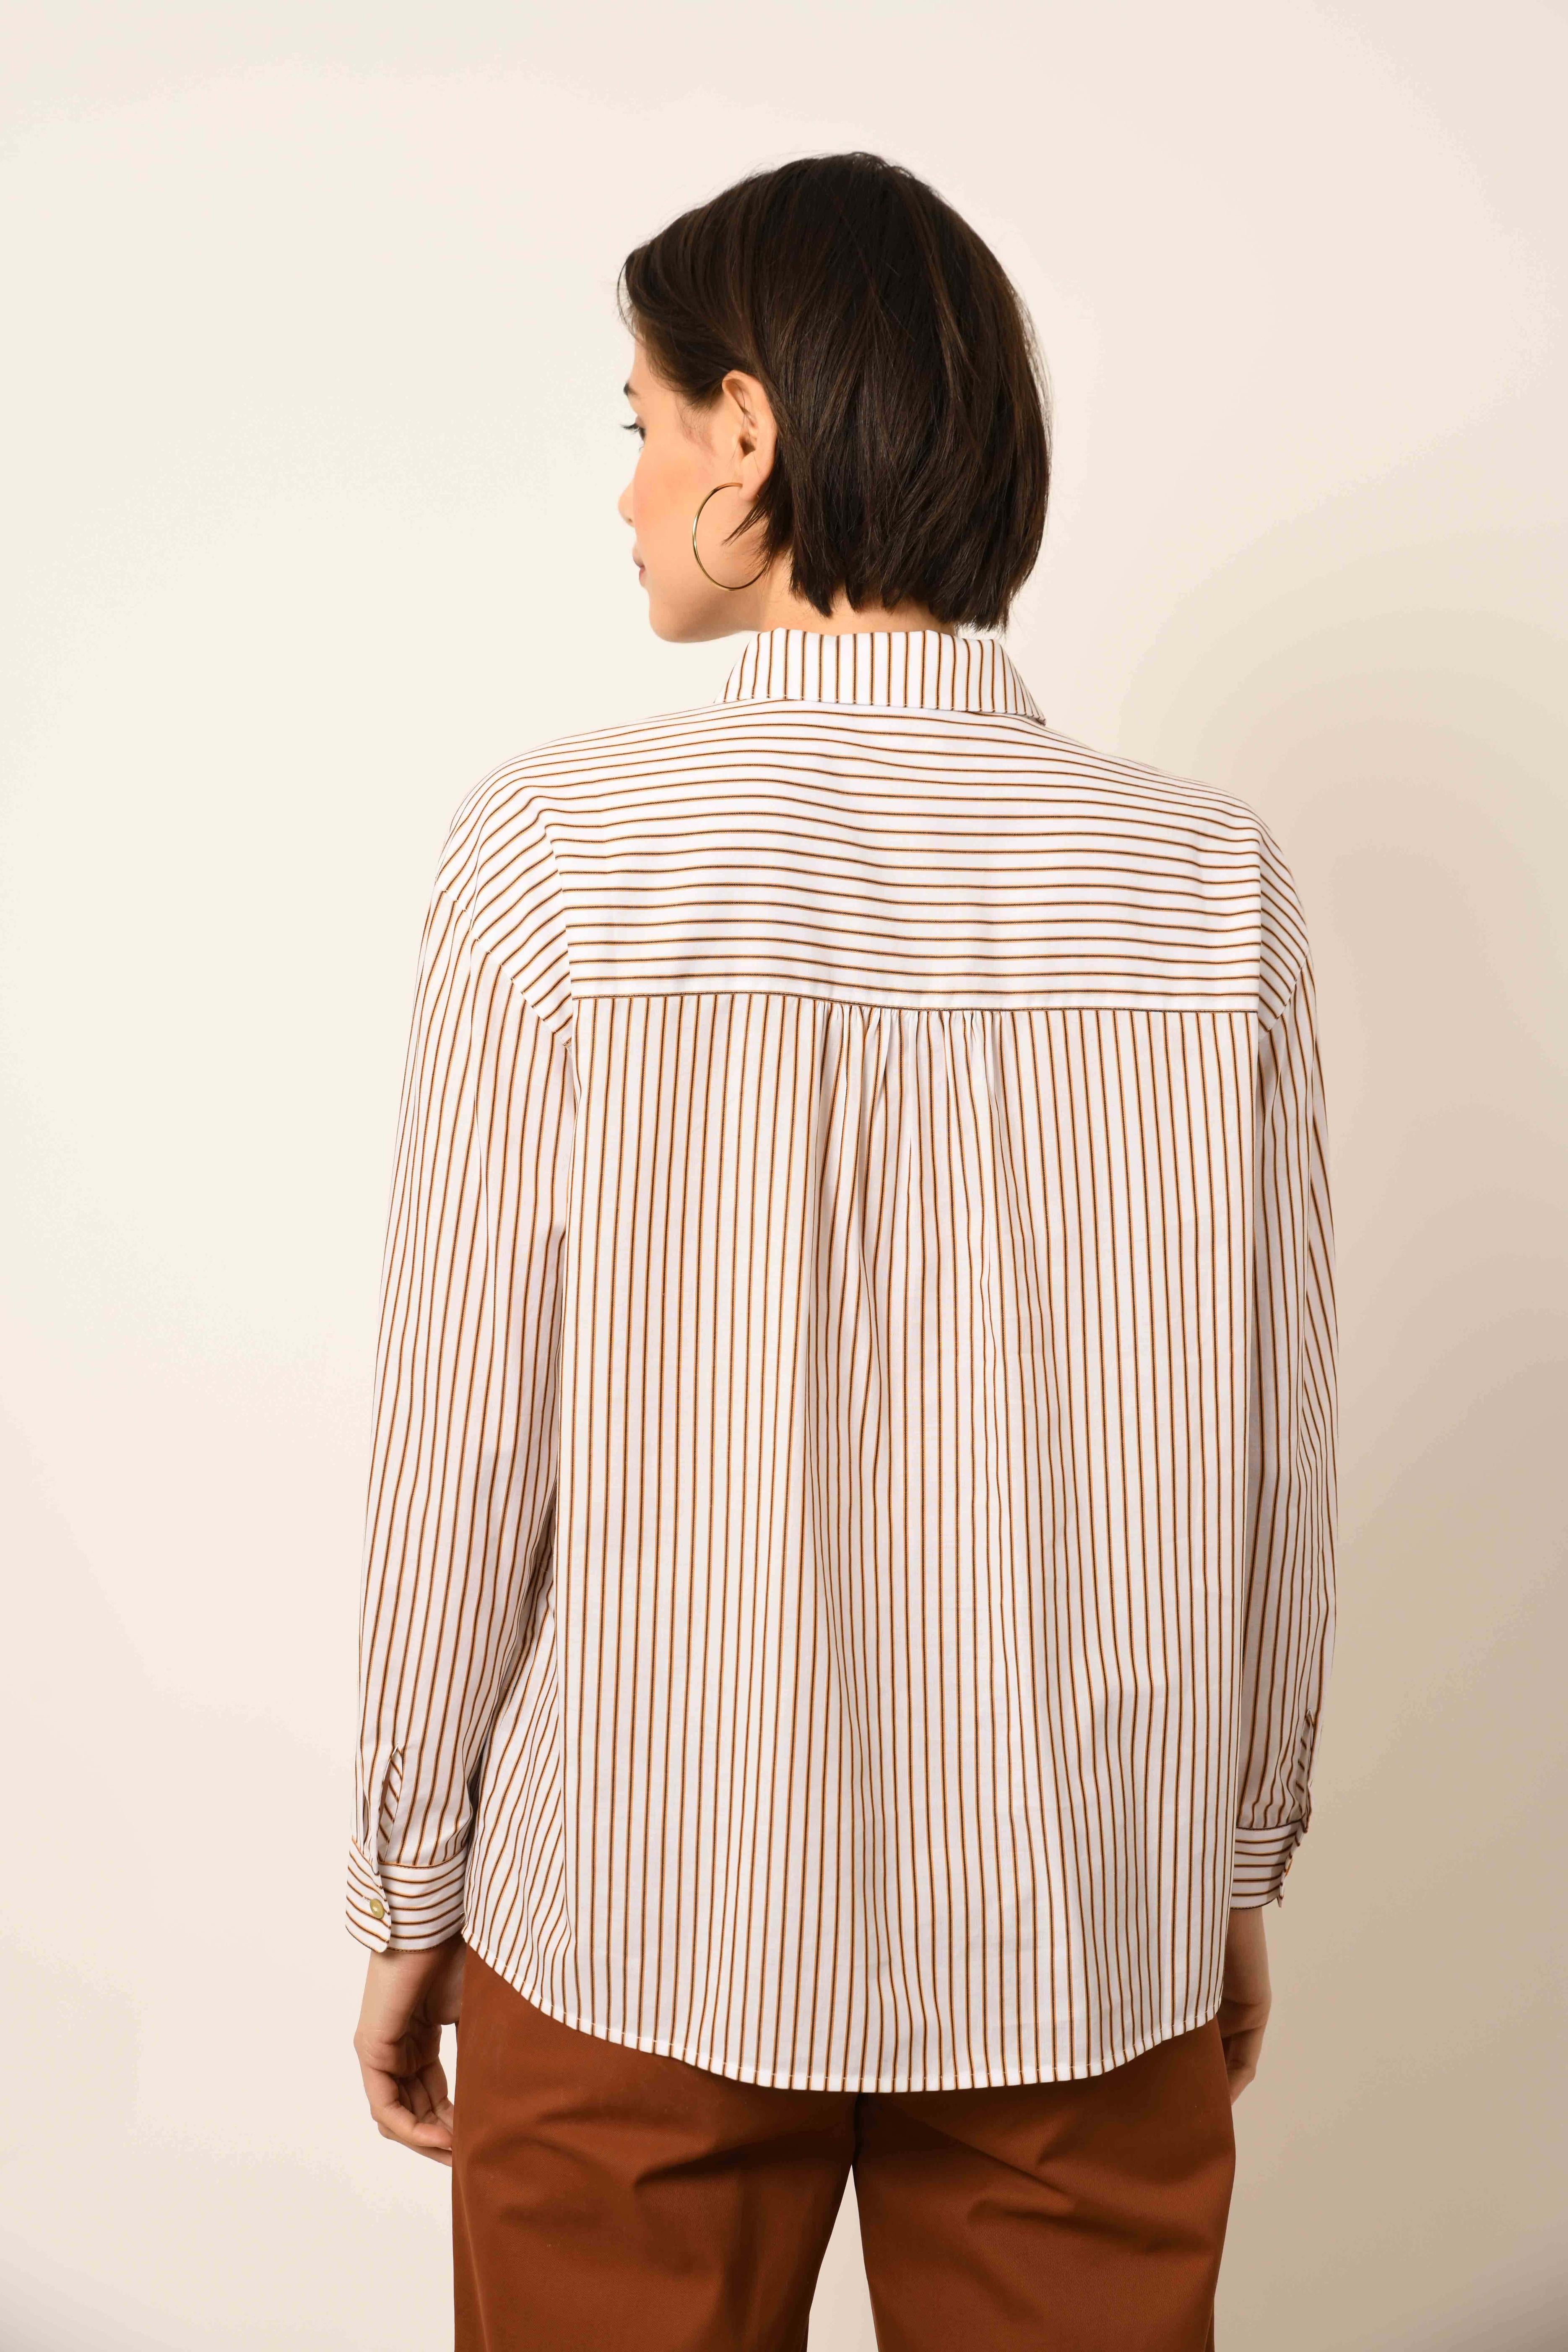 CHEMISE REAL - OCRE STRIPE